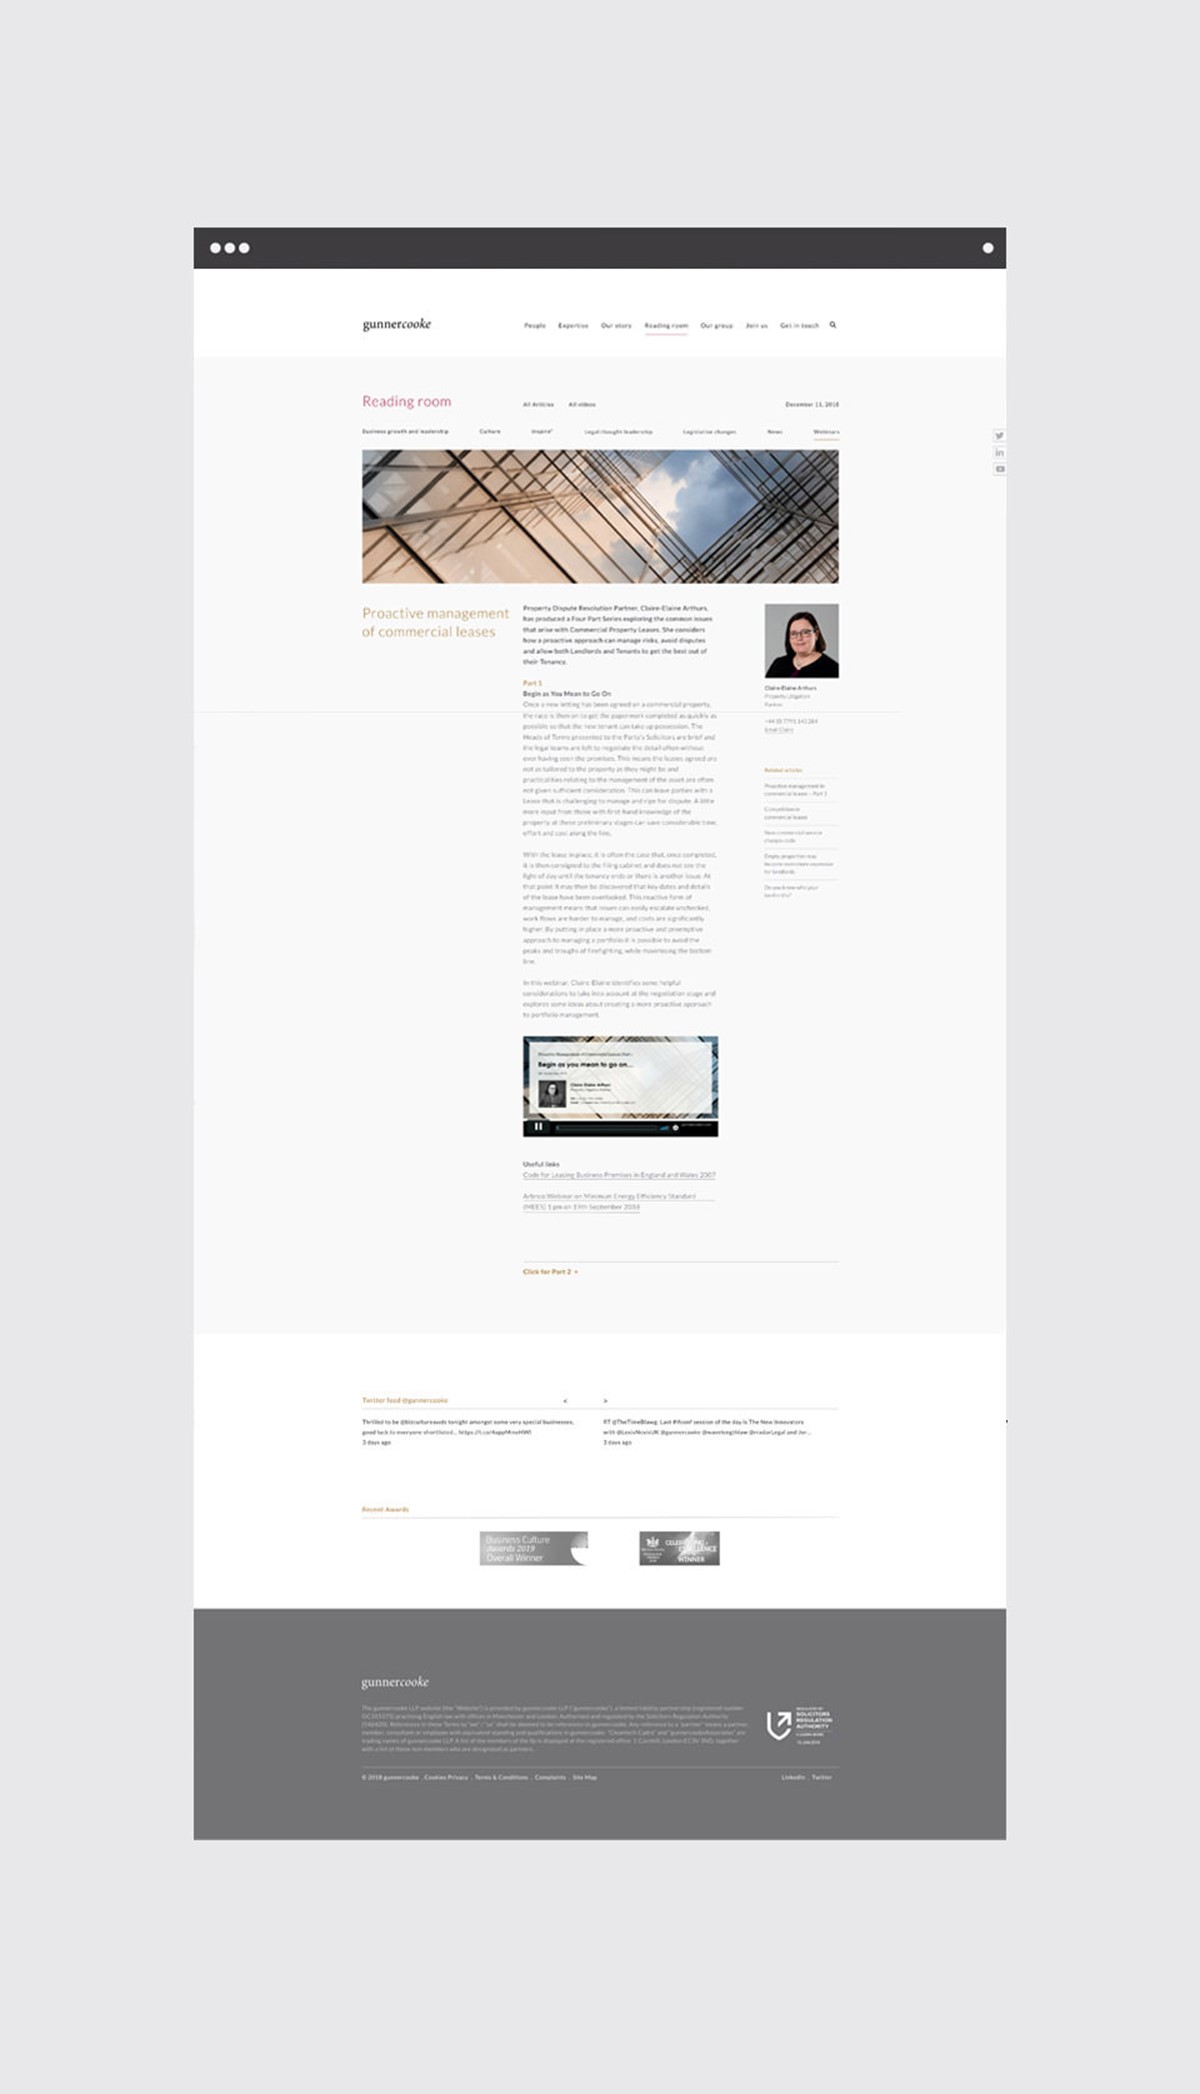 Gunnercooke. Law firm. Reading room page. Website design by Superfried.